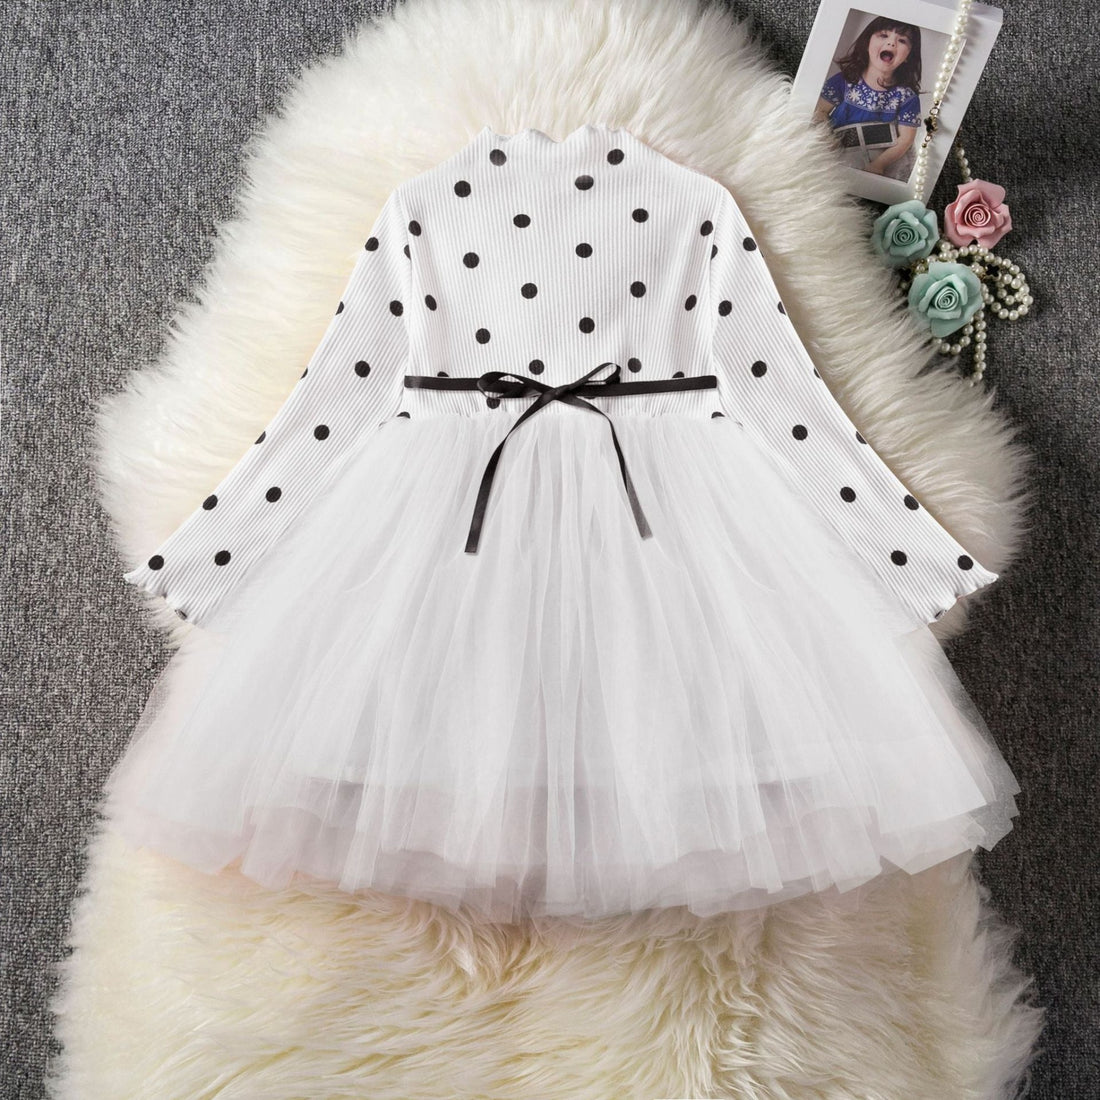 A baby girl wearing an elegant long sleeve tutu lace dress in white color.